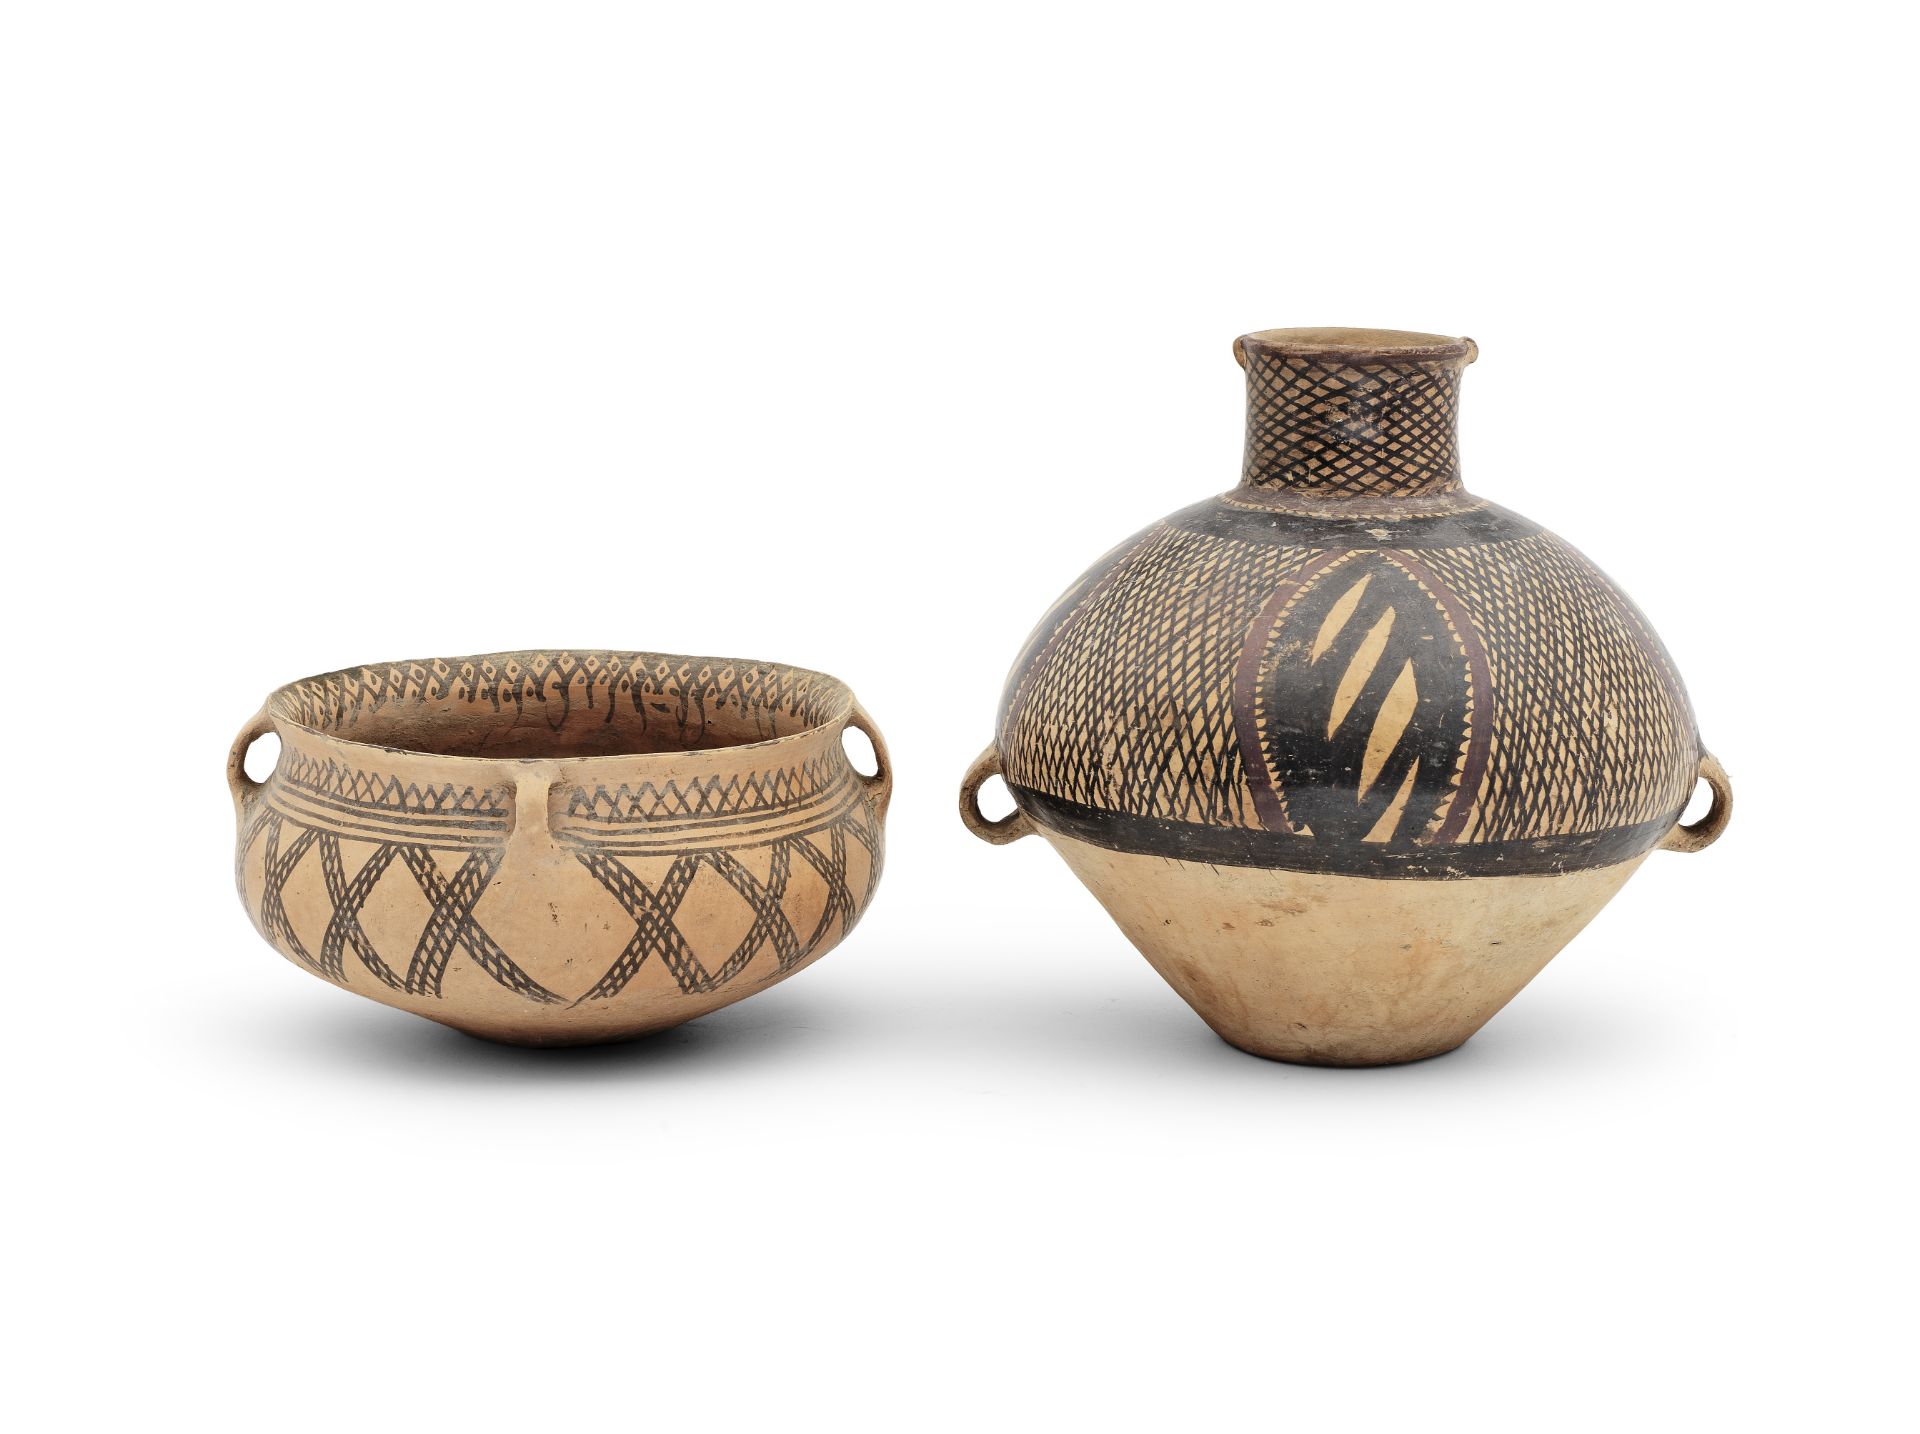 TWO EARLY PAINTED POTTERY VESSELS Neolithic Period, Gansu/Yangshao Culture (2)